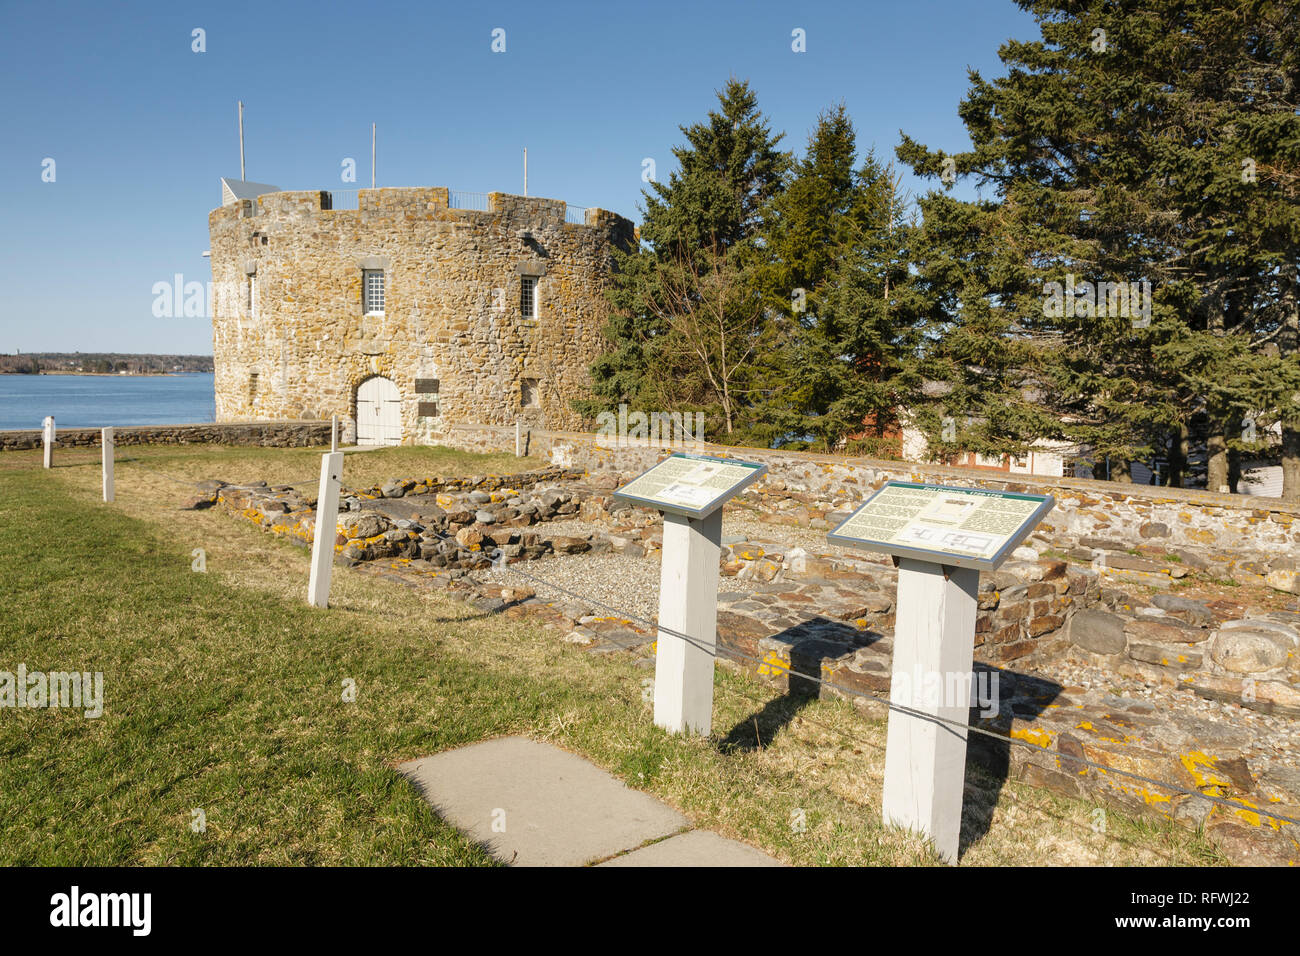 Fort William Henry in the village of New Harbor in the town of Bristol, Maine. Located on the coast of Maine, this fort was originally built in 1692. Stock Photo